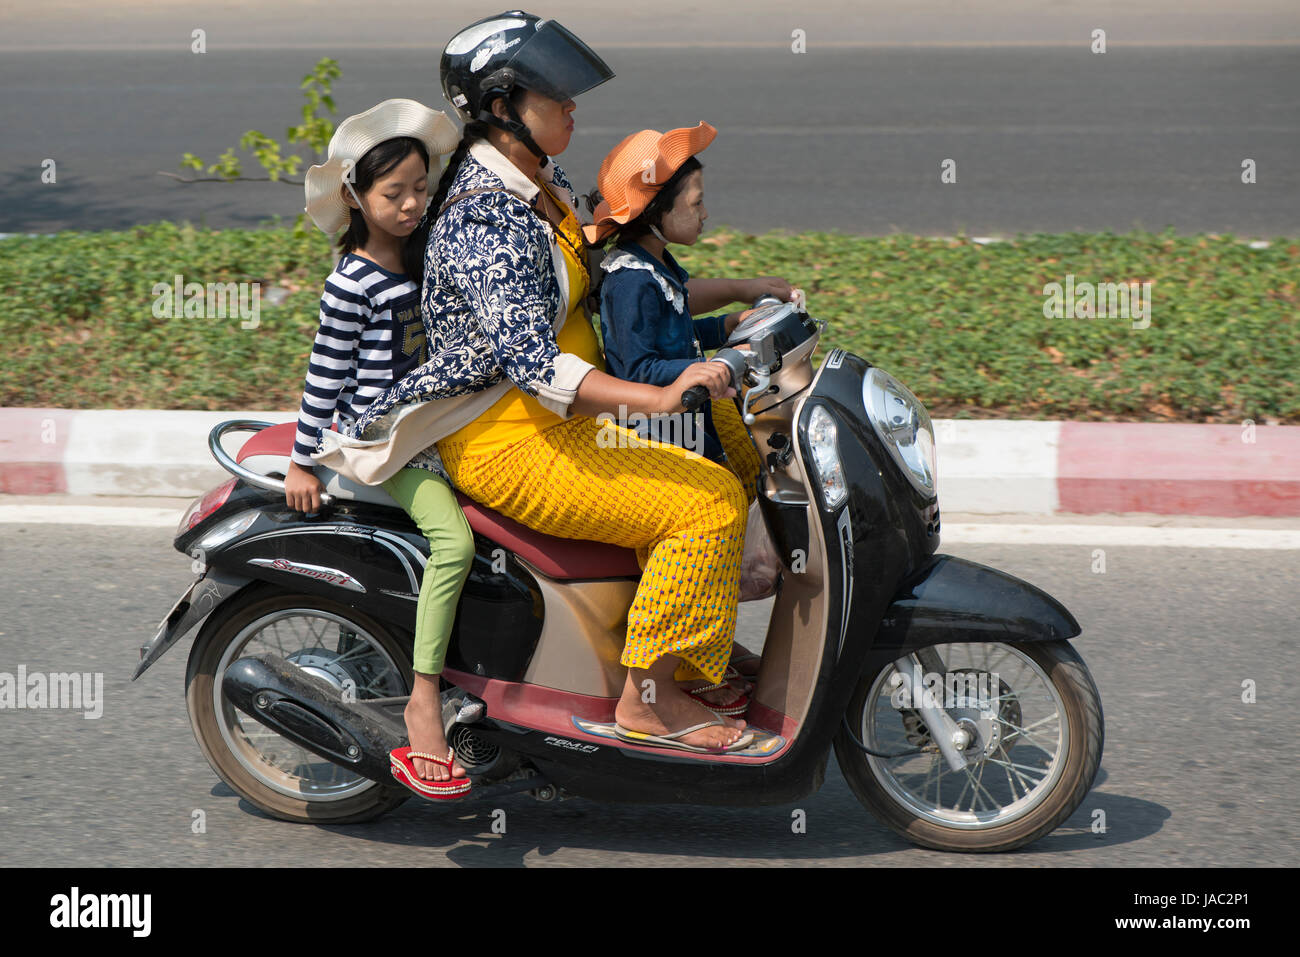 A mother rides on a motorbike with her children in Mandalay, Myanmar (Burma) Stock Photo